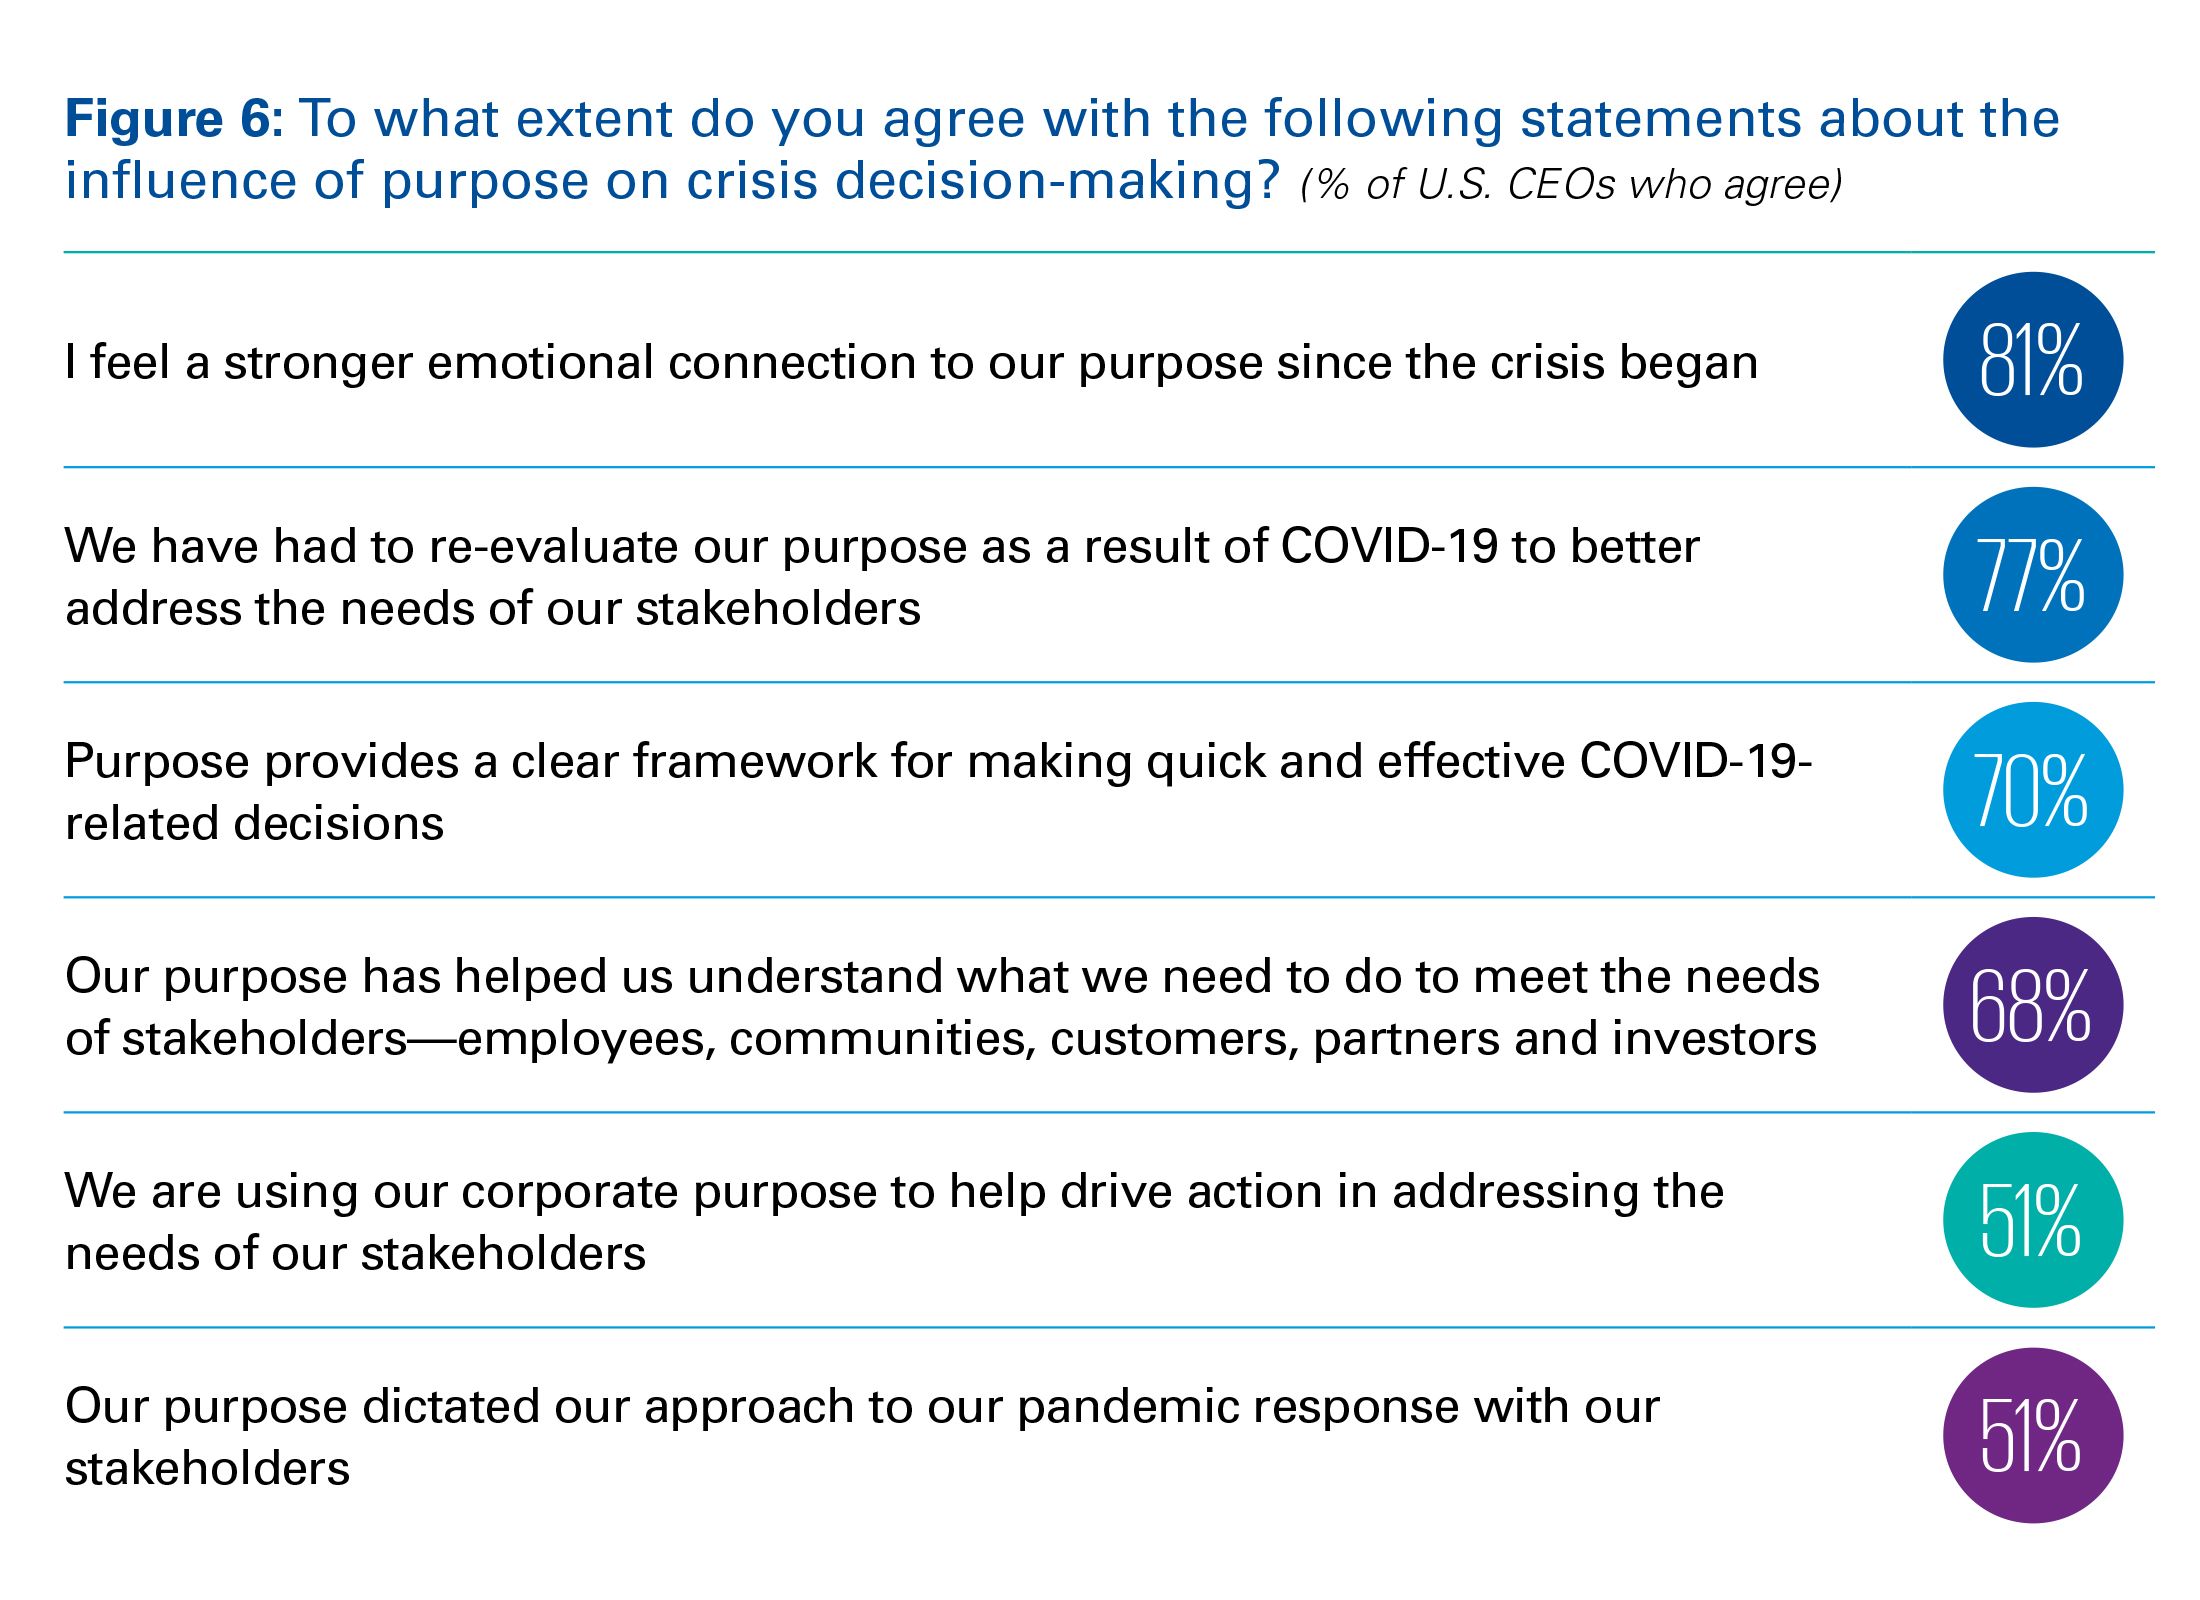 Figure 6: To what extent do you agree with the following statements about the influence of purpose on crisis decision-making?